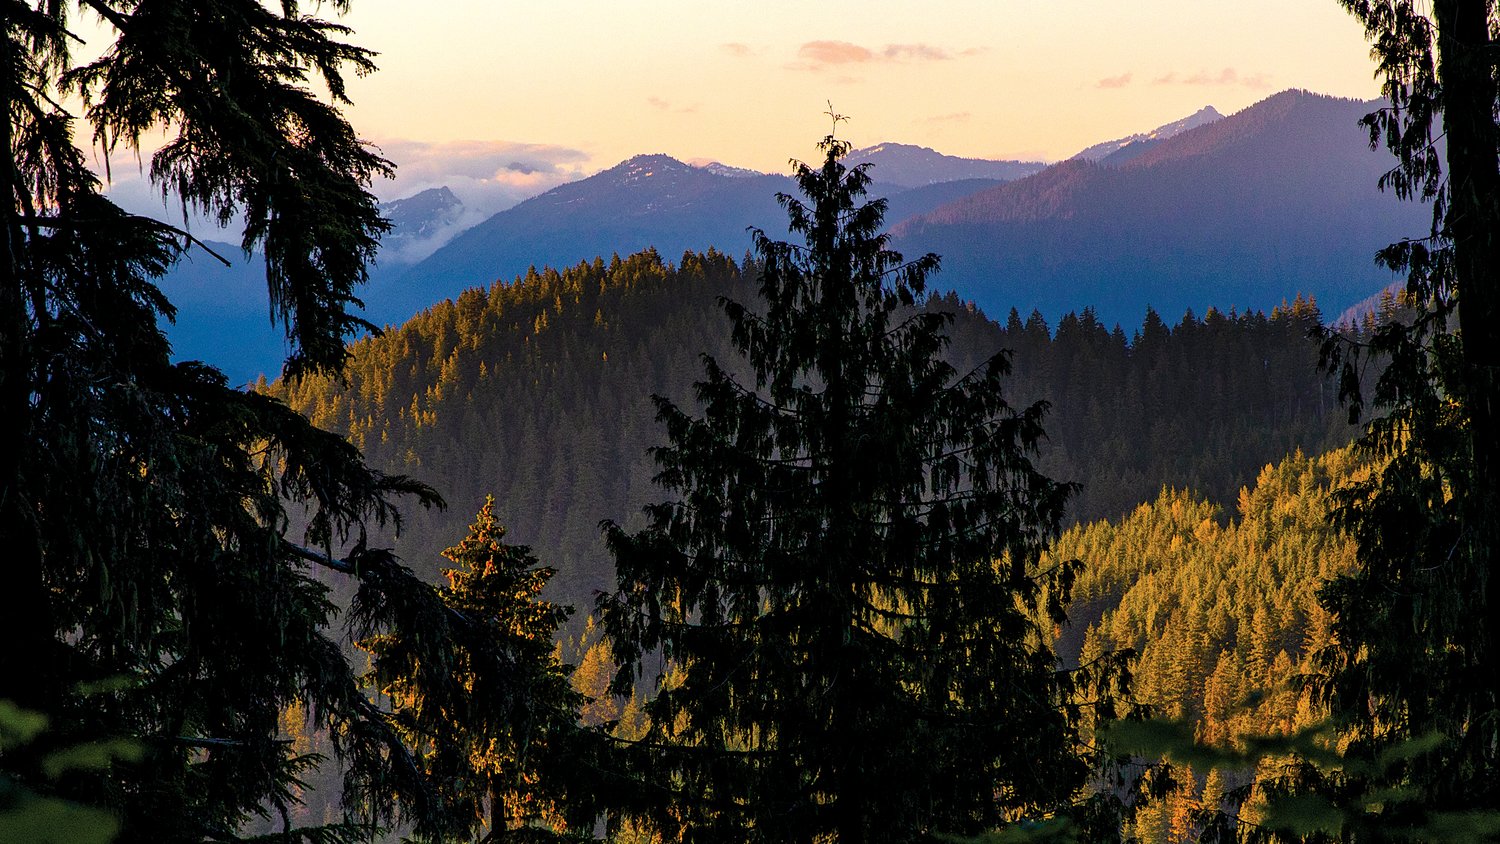 The sun sets over the Gifford Pinchot National Forest on Wednesday.